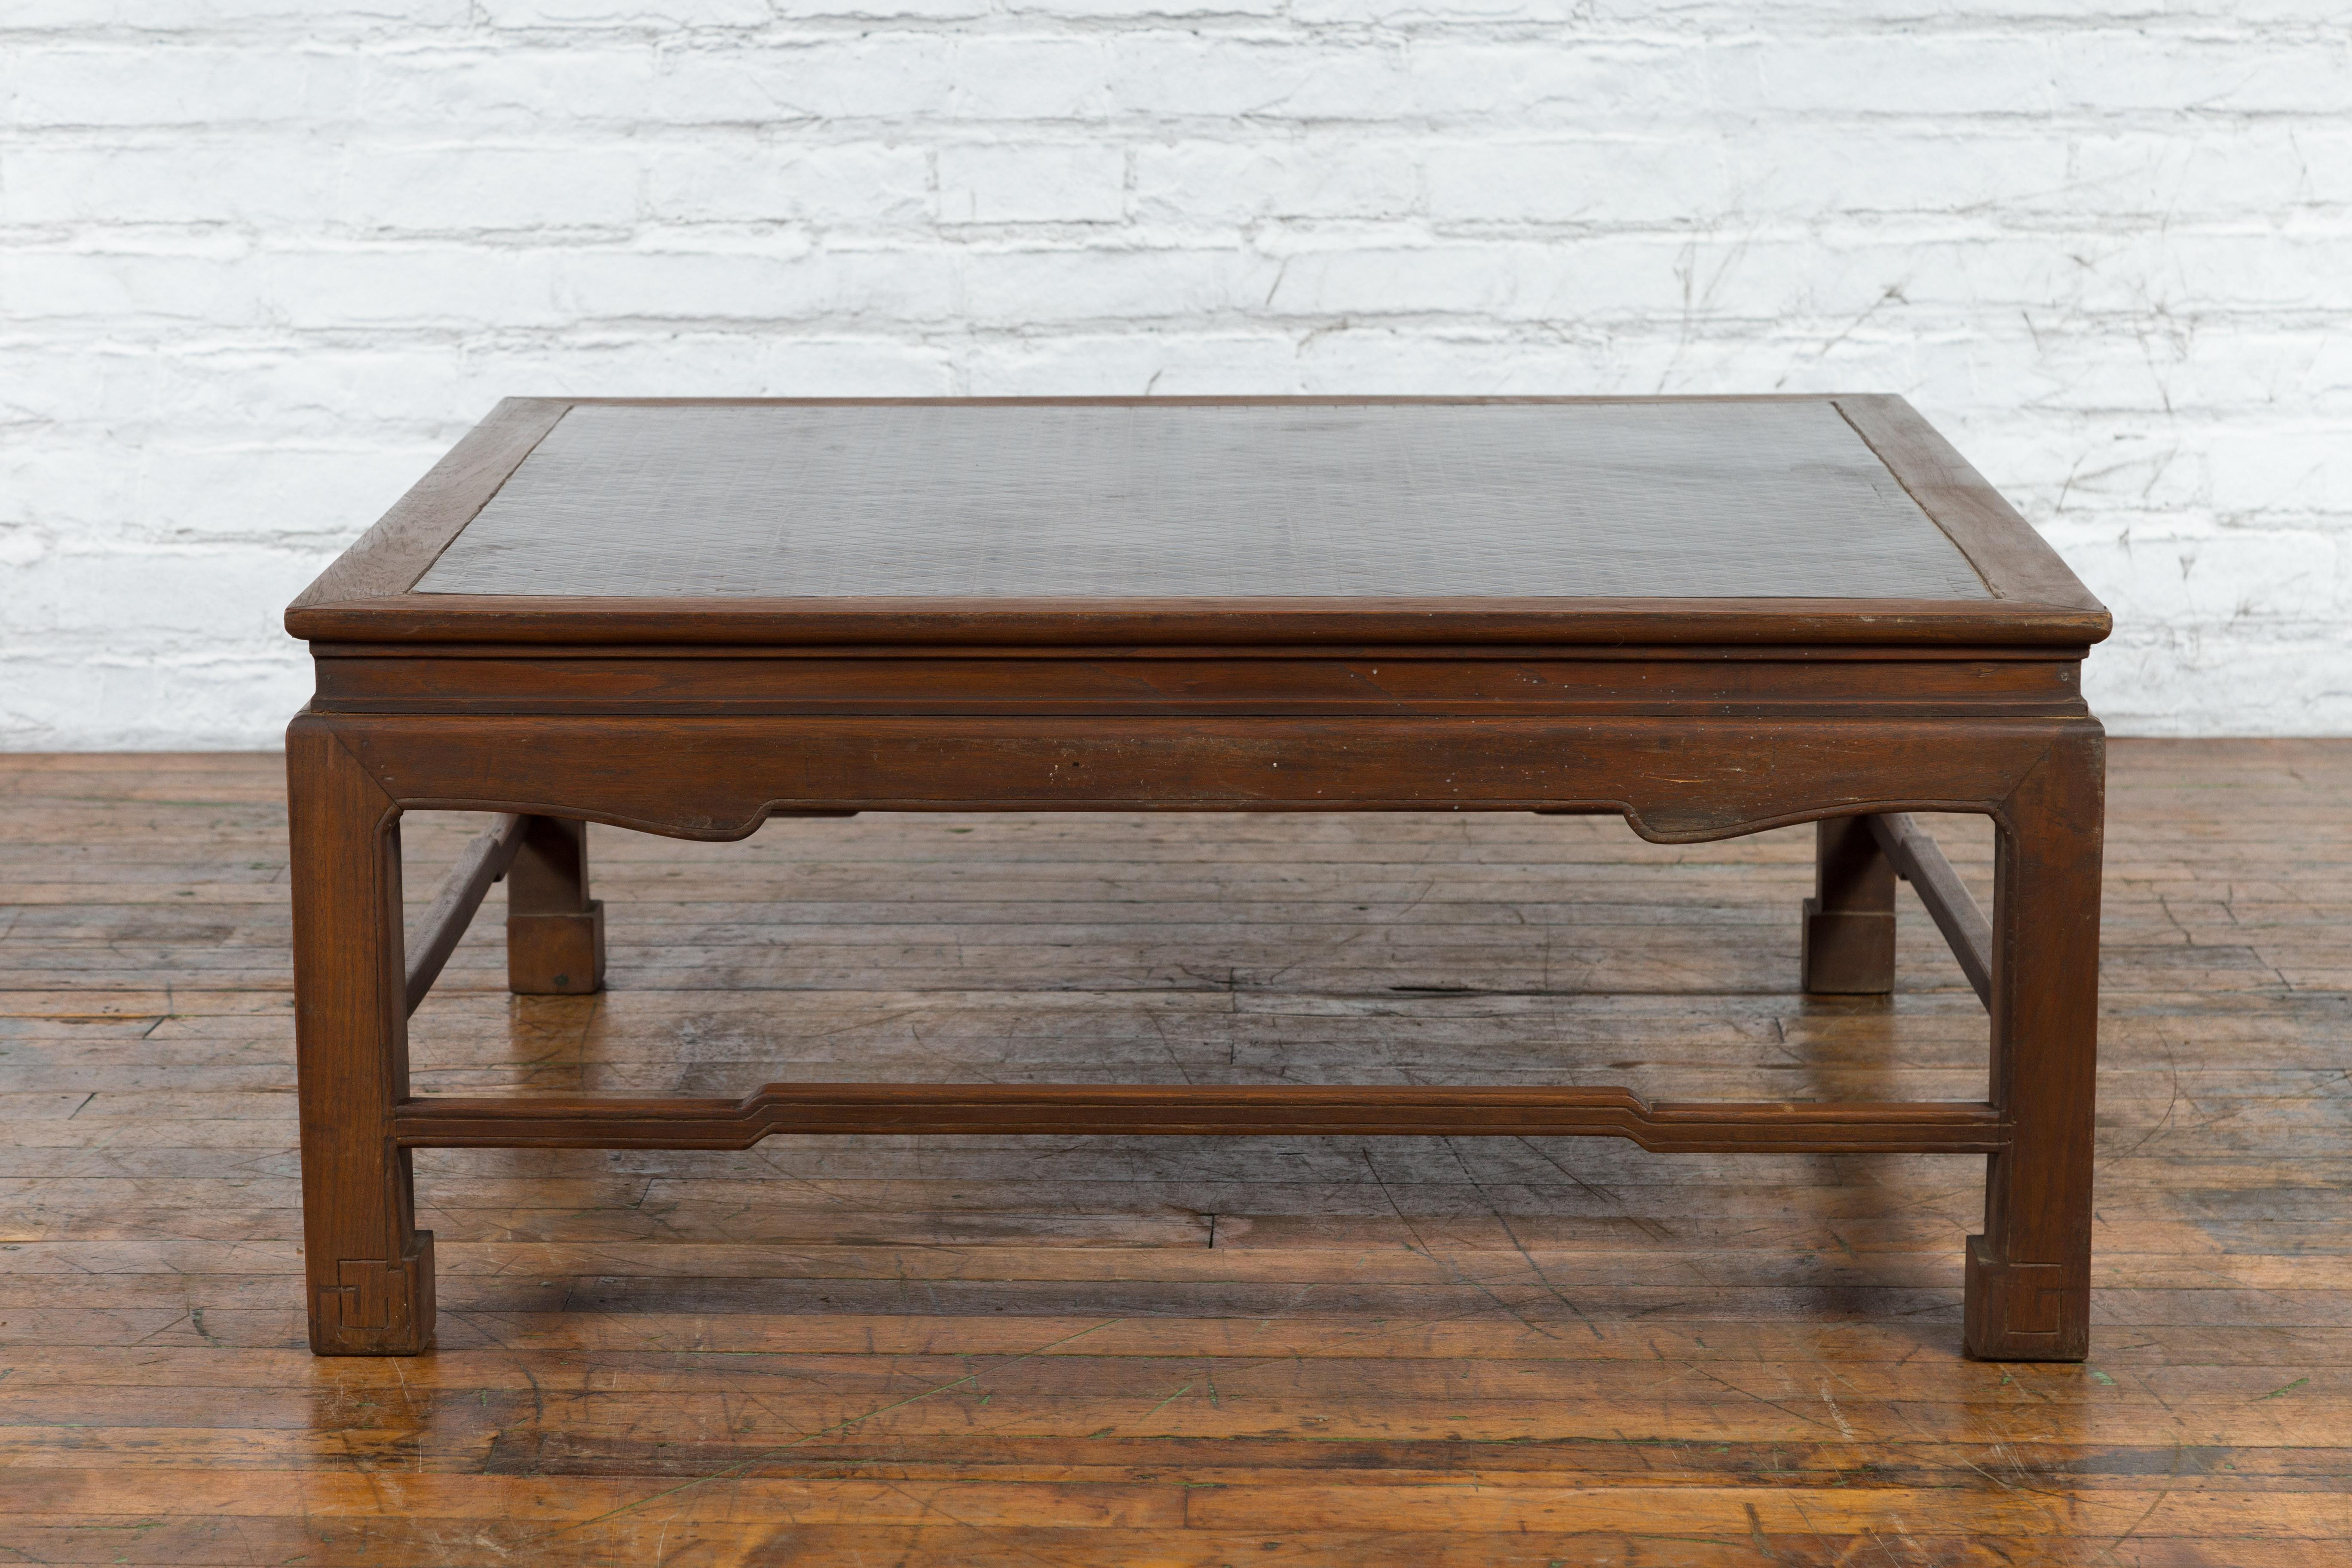 A vintage Burmese brown wood coffee table from the mid 20th century, with Negora lacquer inset top, horse hoof feet and hump back stretchers. We currently have two tables available should you need a pair. They are priced individually. Created in